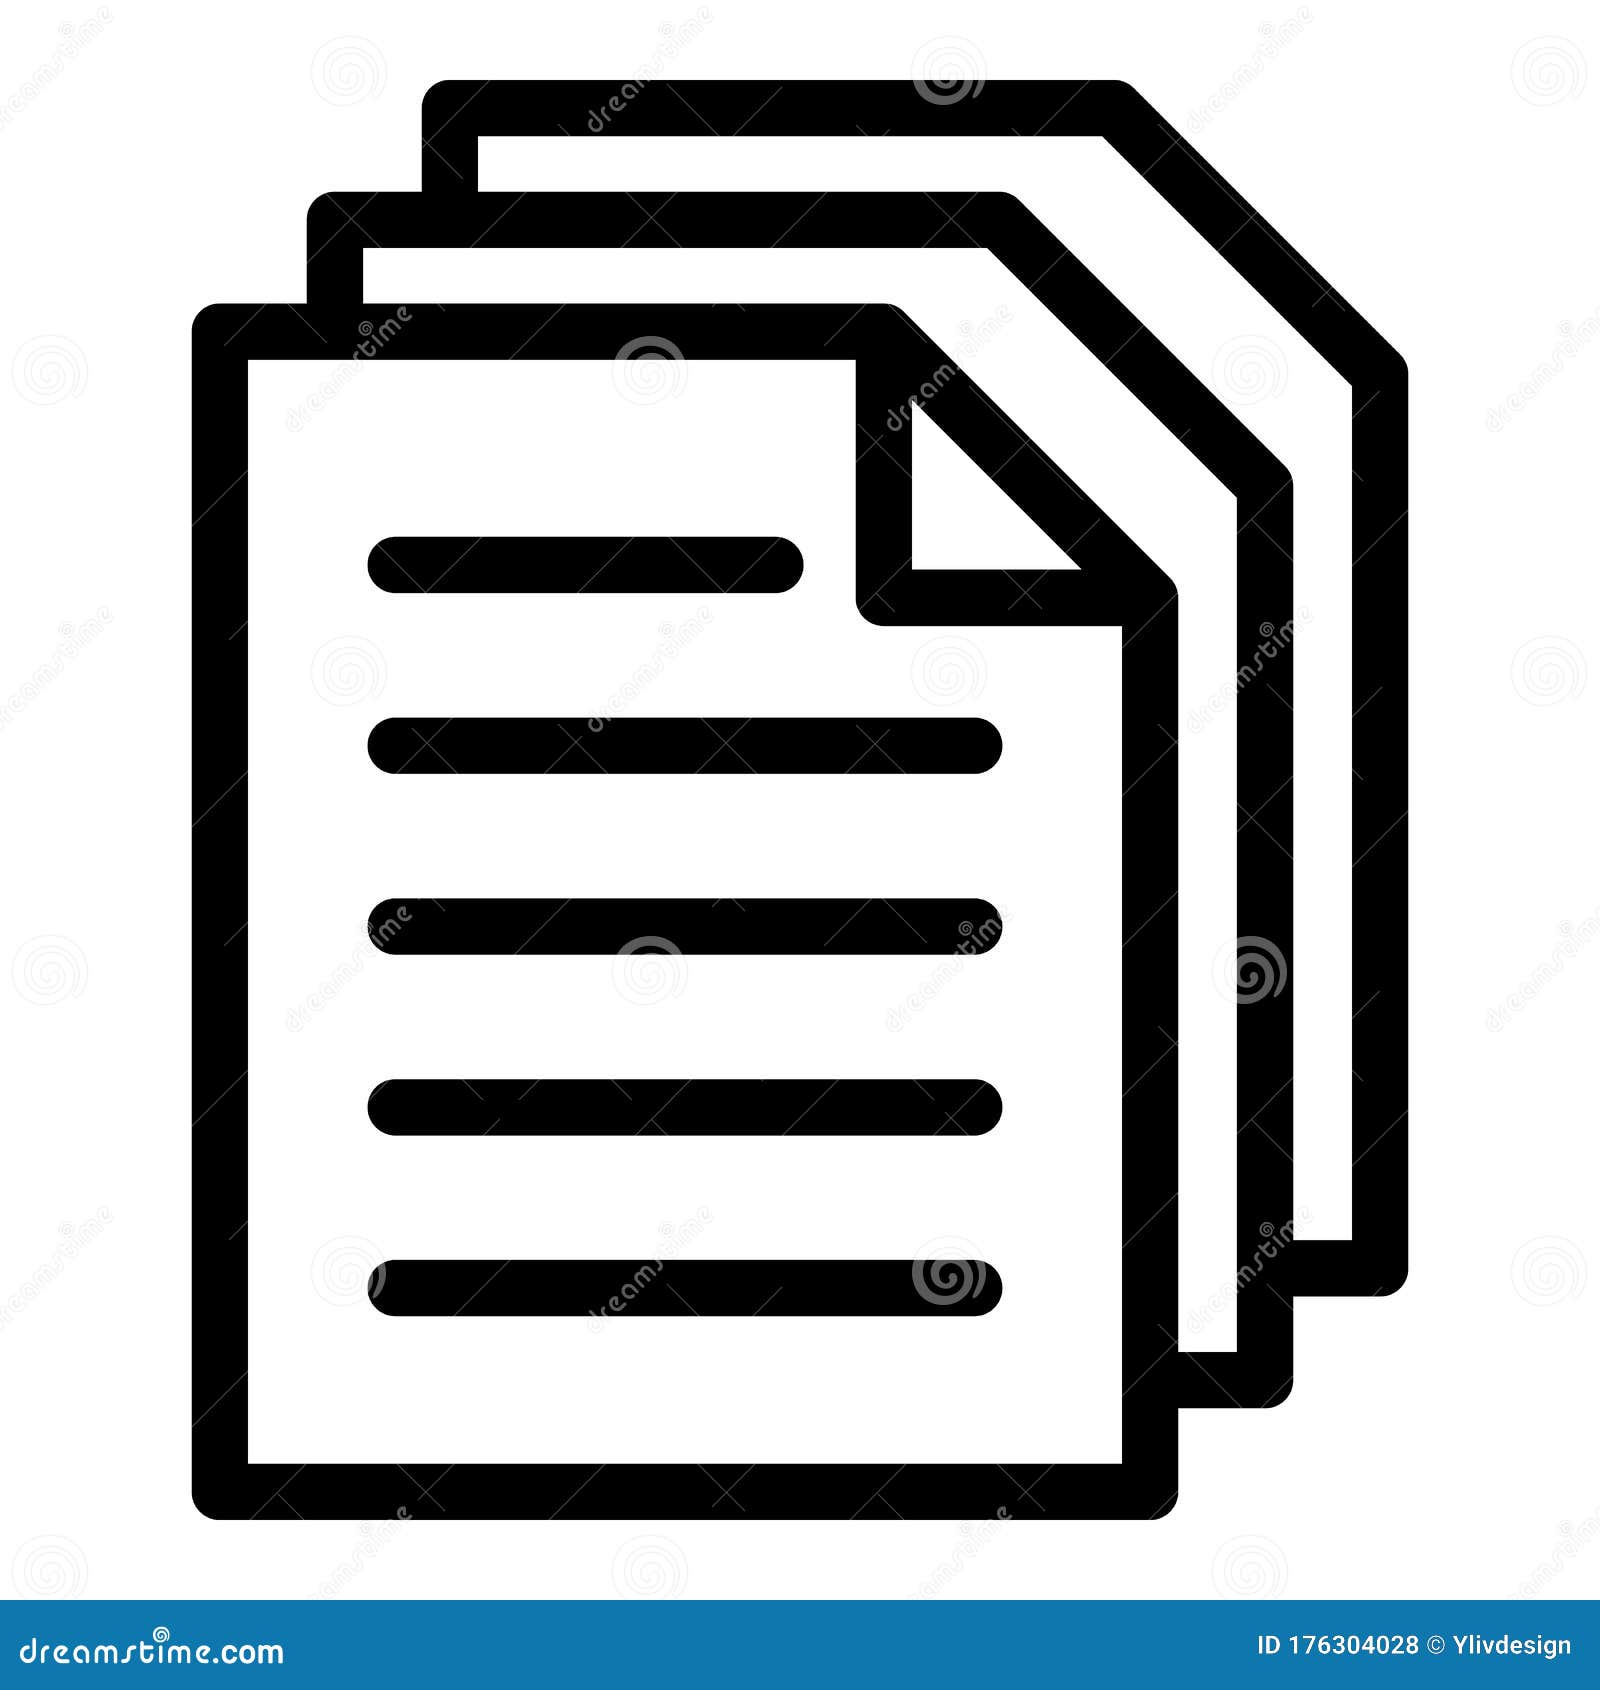 summary papers icon, outline style